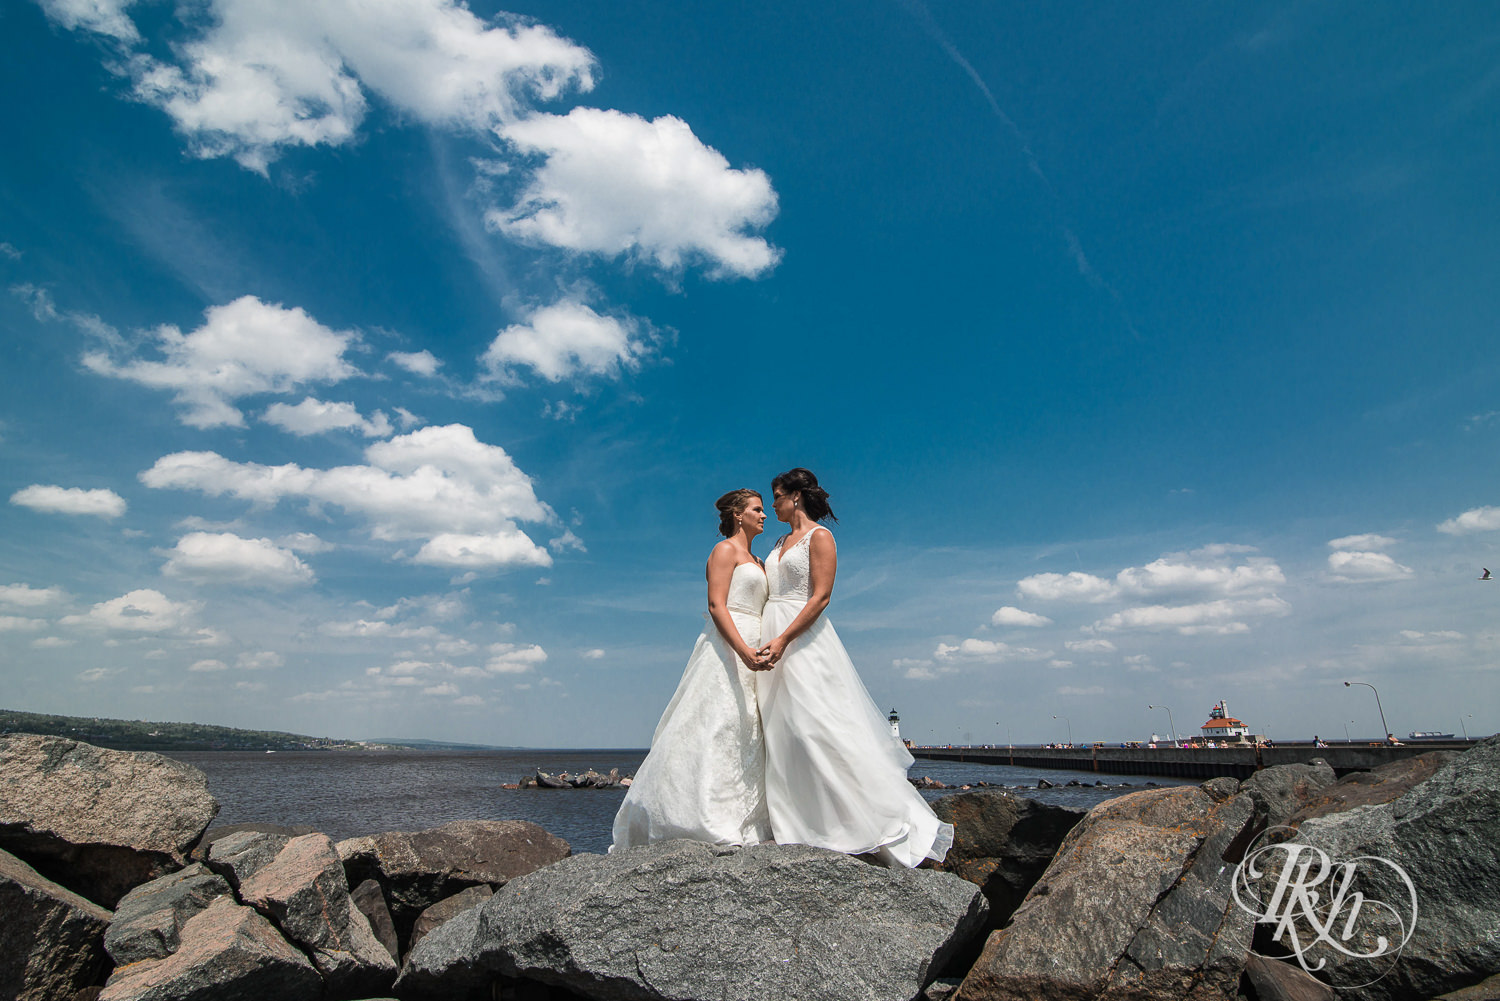 Lesbian brides smile on the shore of Lake Superior in Duluth, Minnesota.